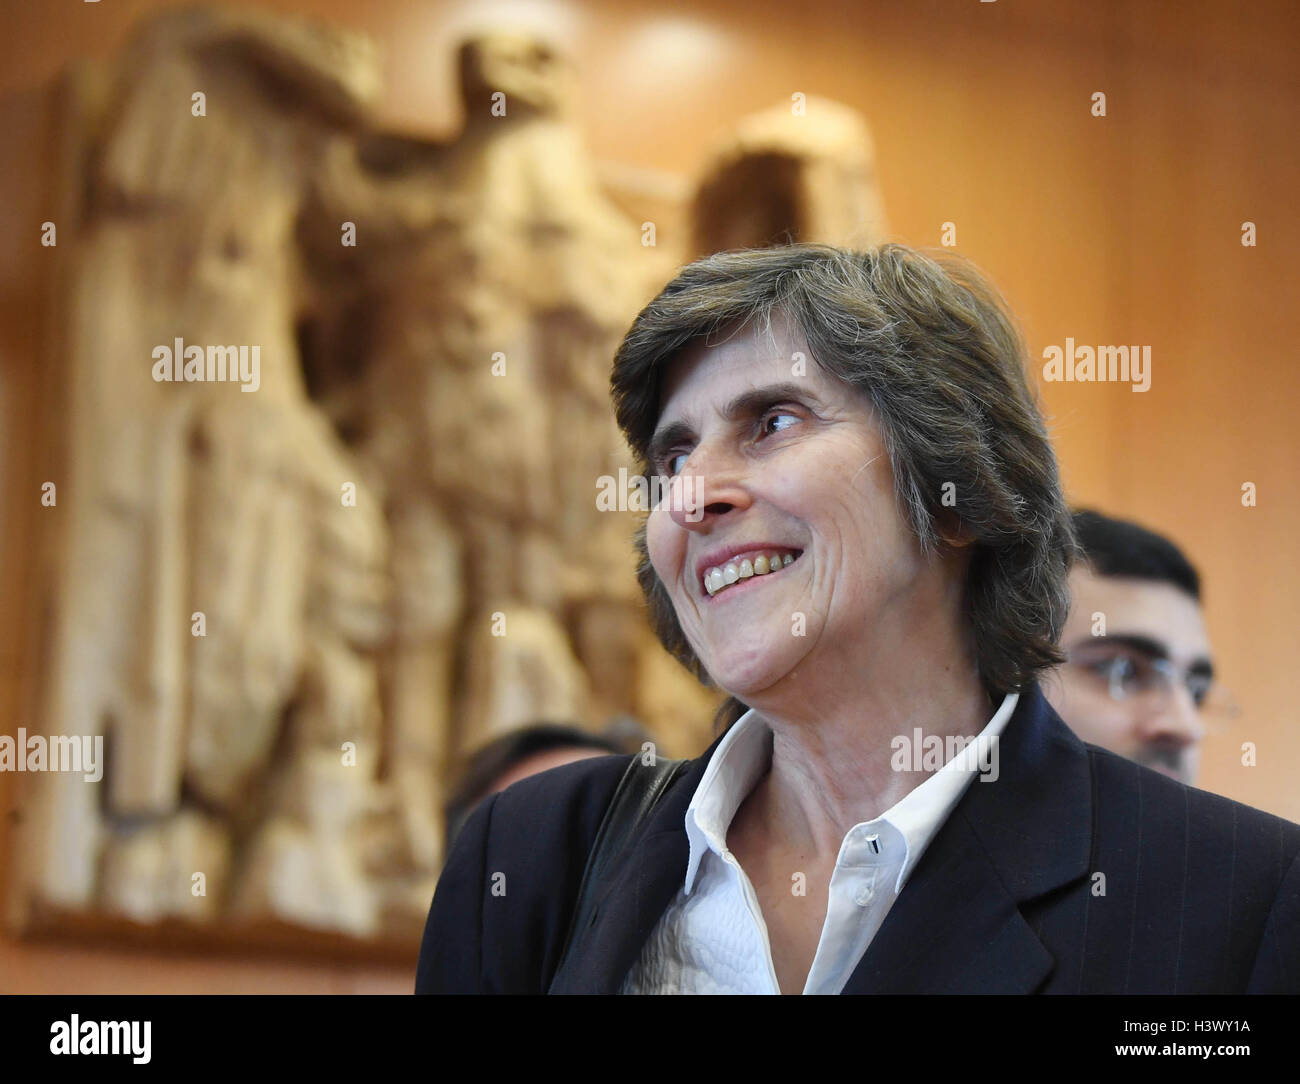 Karlsruhe, Germany. 12th Oct, 2016. Complainant Marianne Grimmenstein-Balas waits for the start of the trials regarding the emergency appeal against the trade agreement CETA in Karlsruhe, Germany, 12 October 2016. Photo: Uli Deck/dpa/Alamy Live News Stock Photo